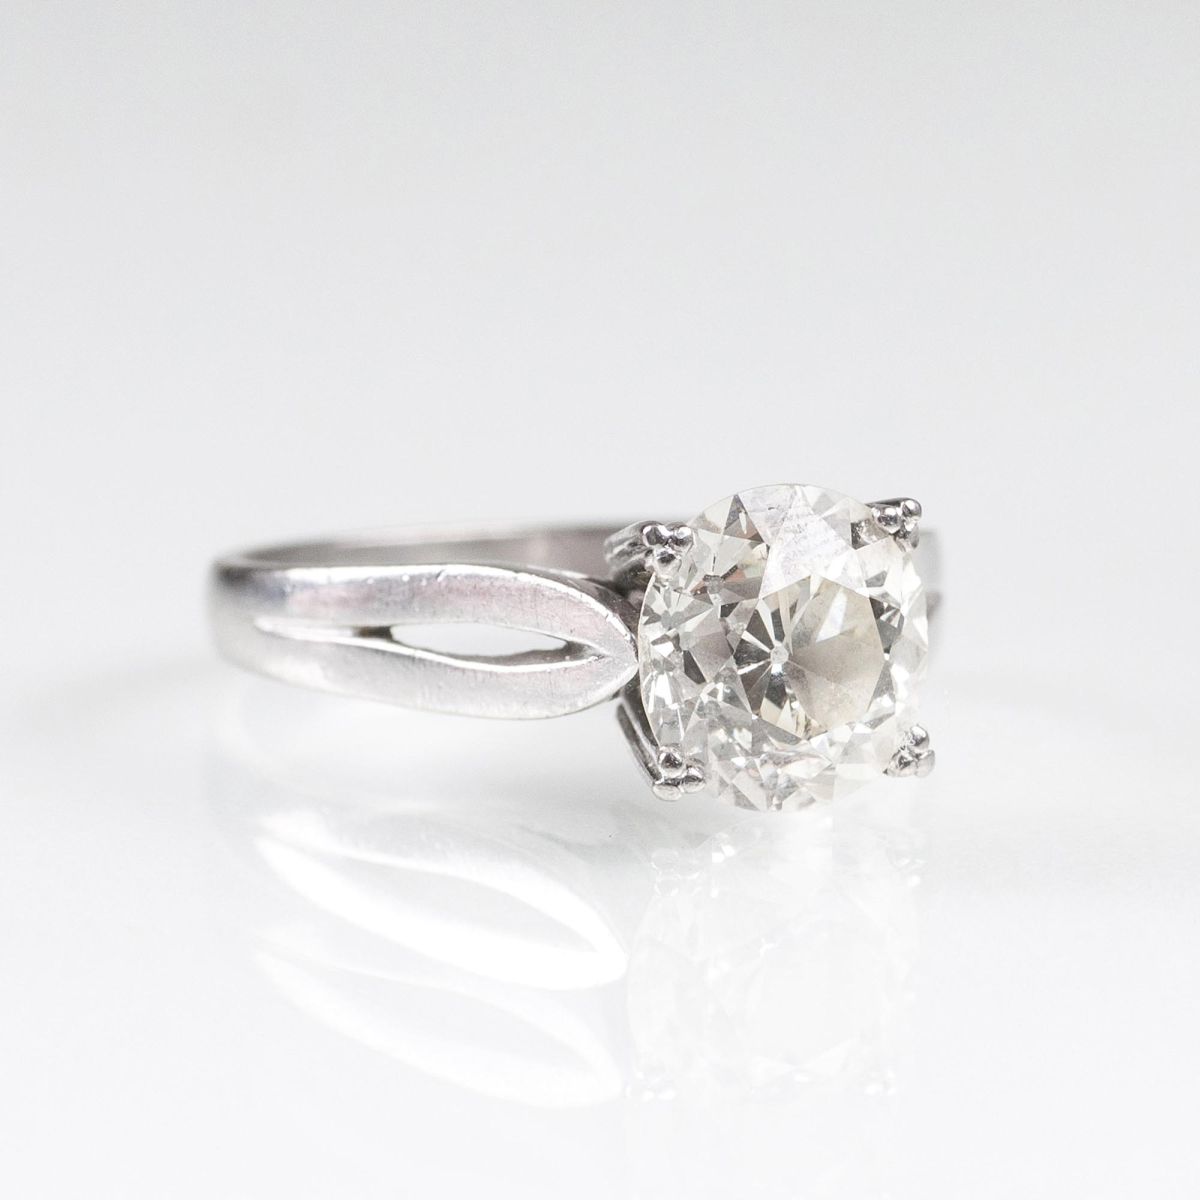 An Old European Cut Diamond Solitaire Ring - image 2